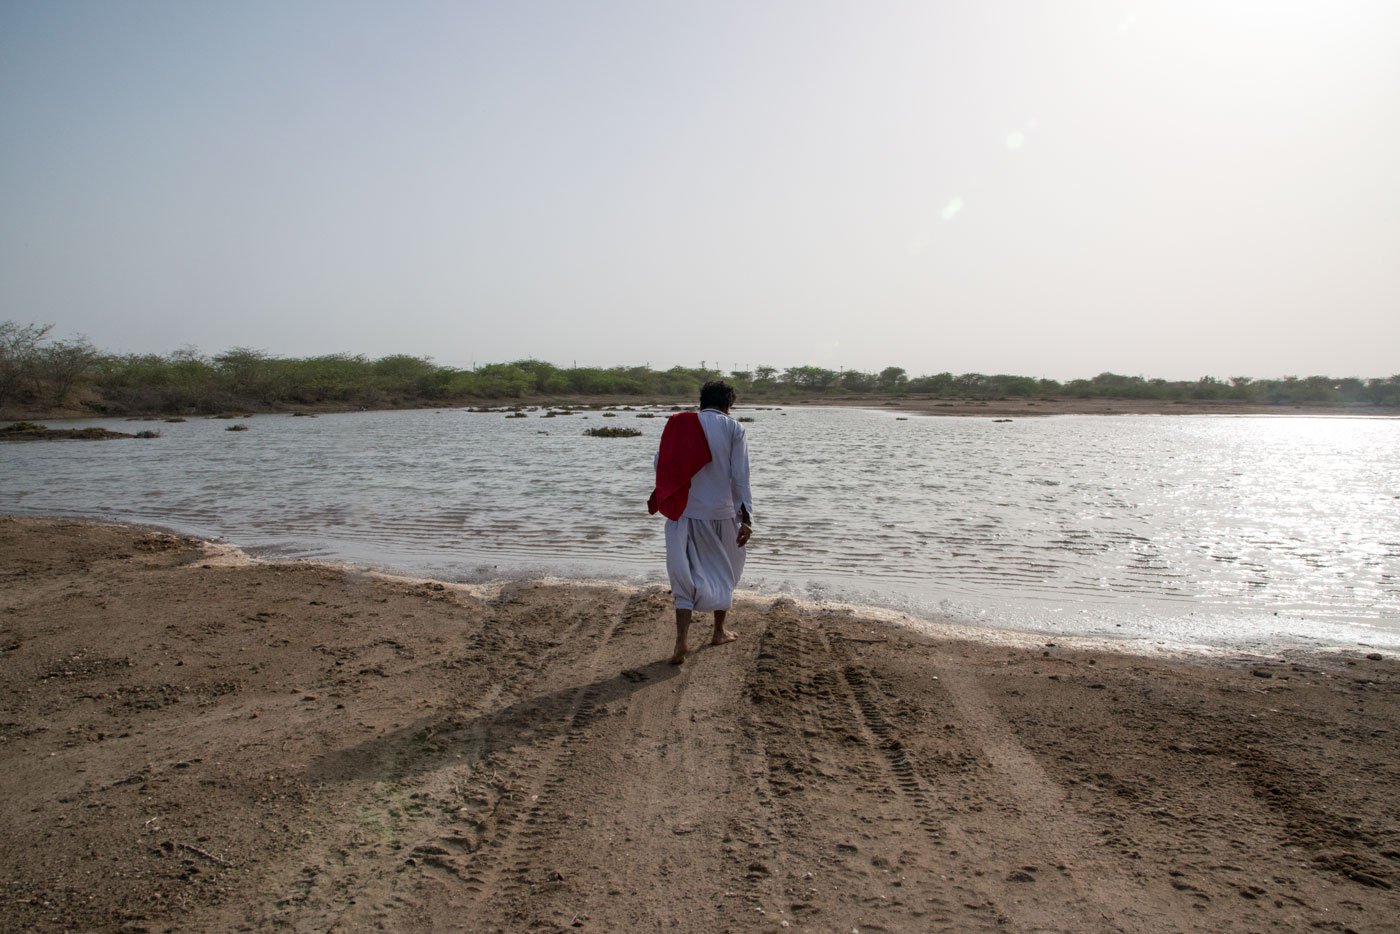 As the low tide settles in the Gulf of Kachchh, Jethabhai gets ready to head back home